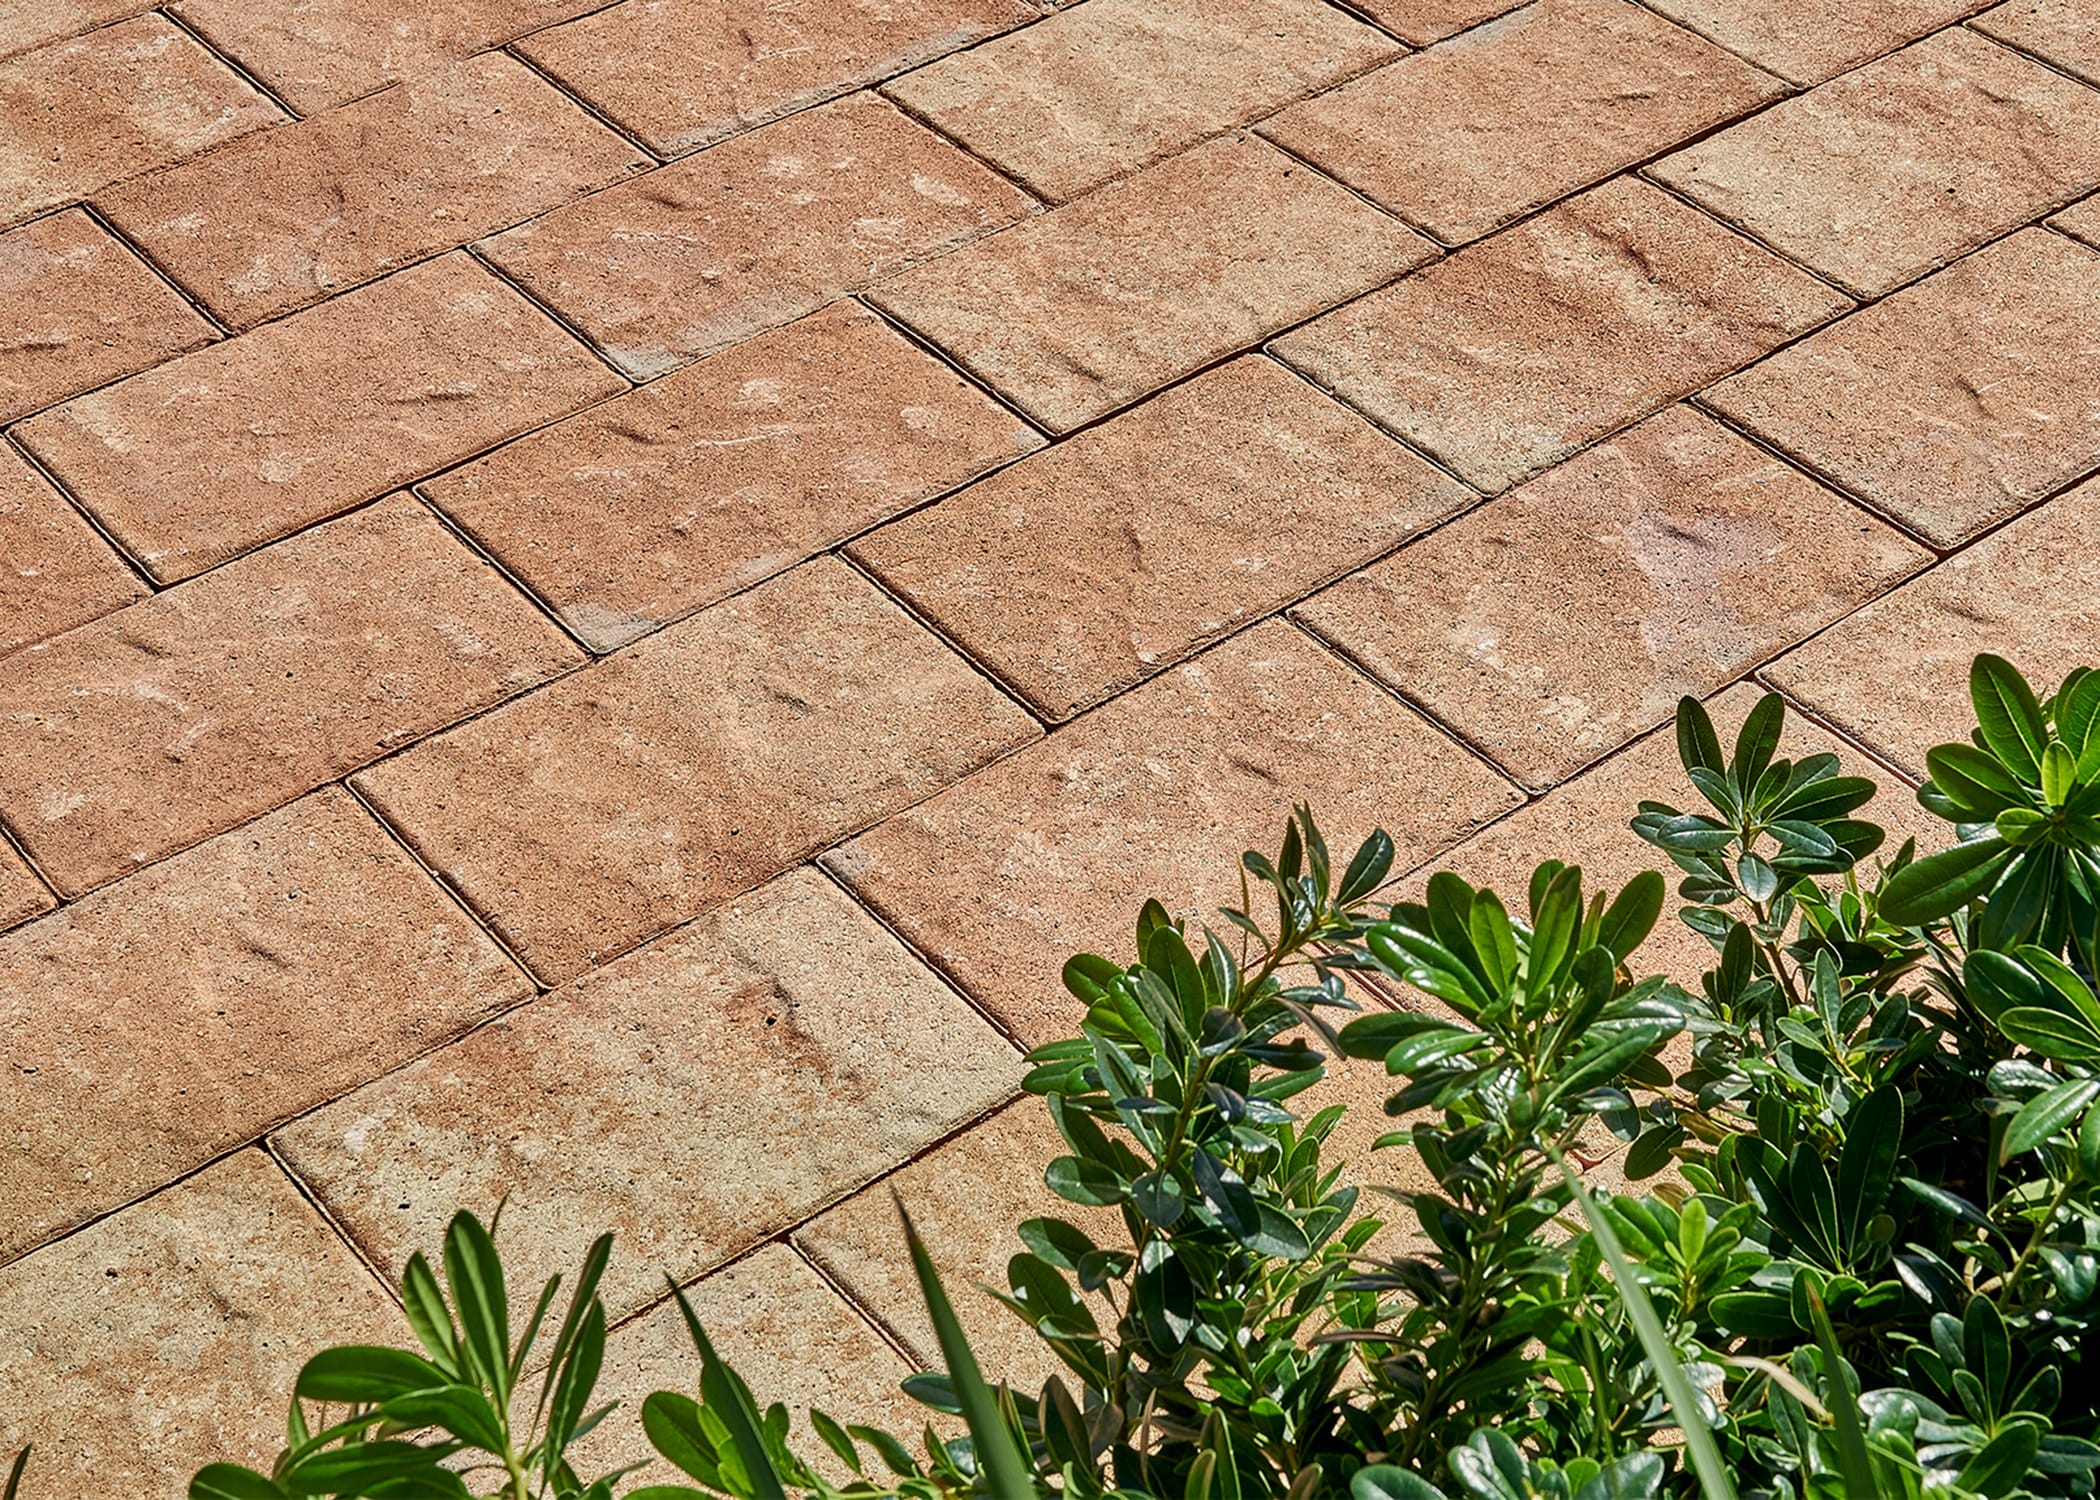 12-in L x 12-in W x 2-in H Square Gray Concrete Patio Stone in the Pavers &  Stepping Stones department at